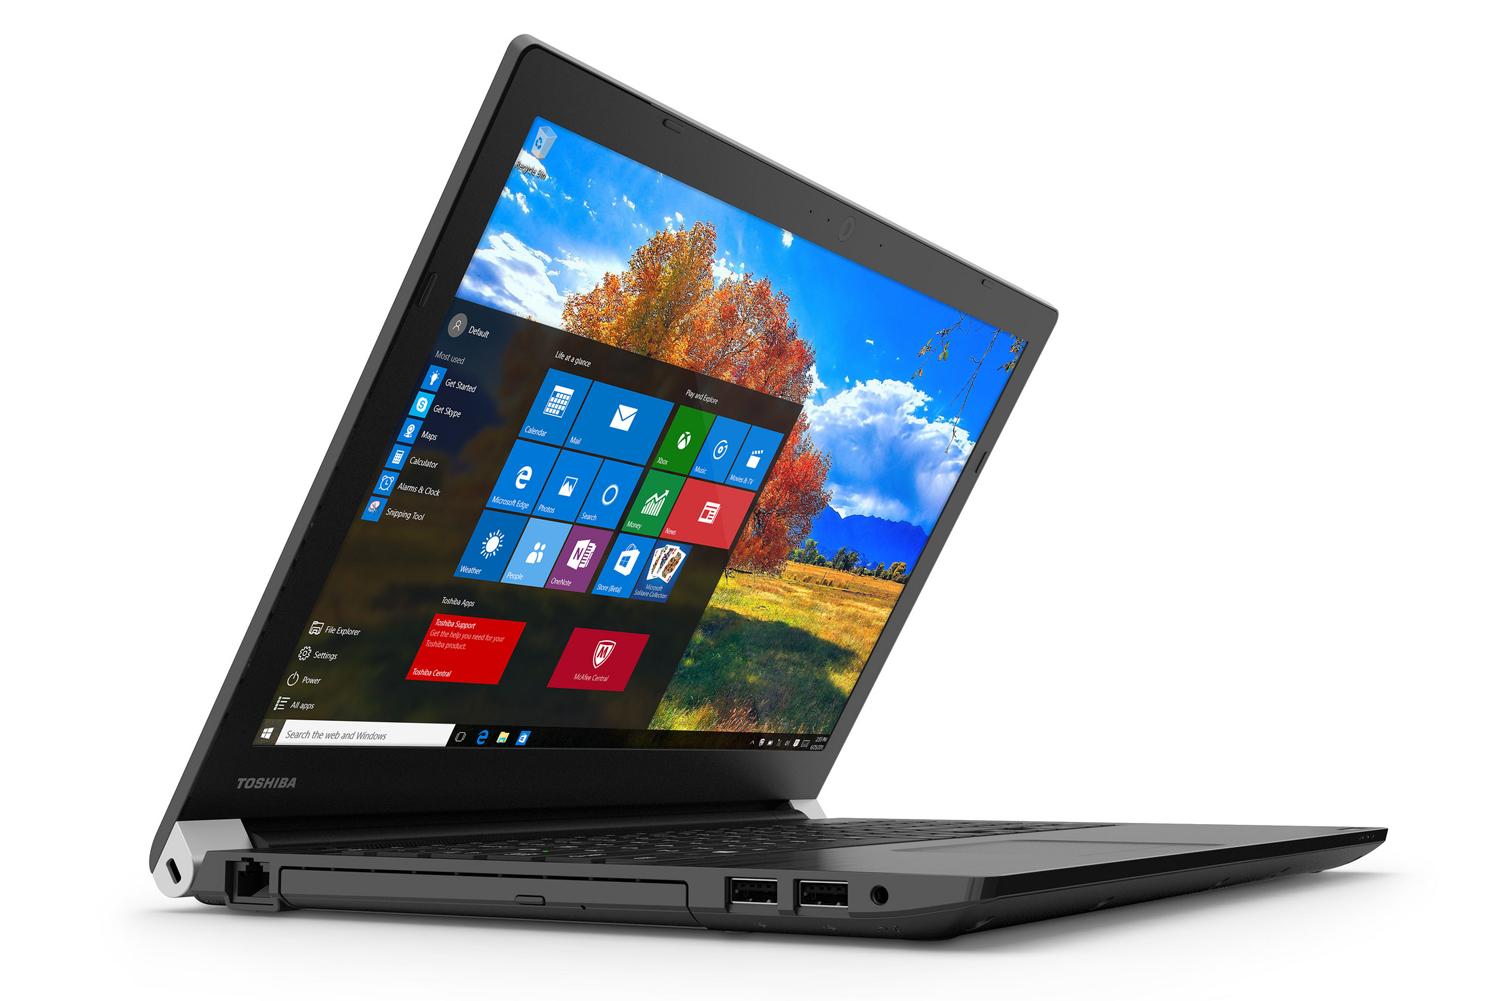 toshiba proves its ready for windows 10 with a selection of new pcs tecraa50 2